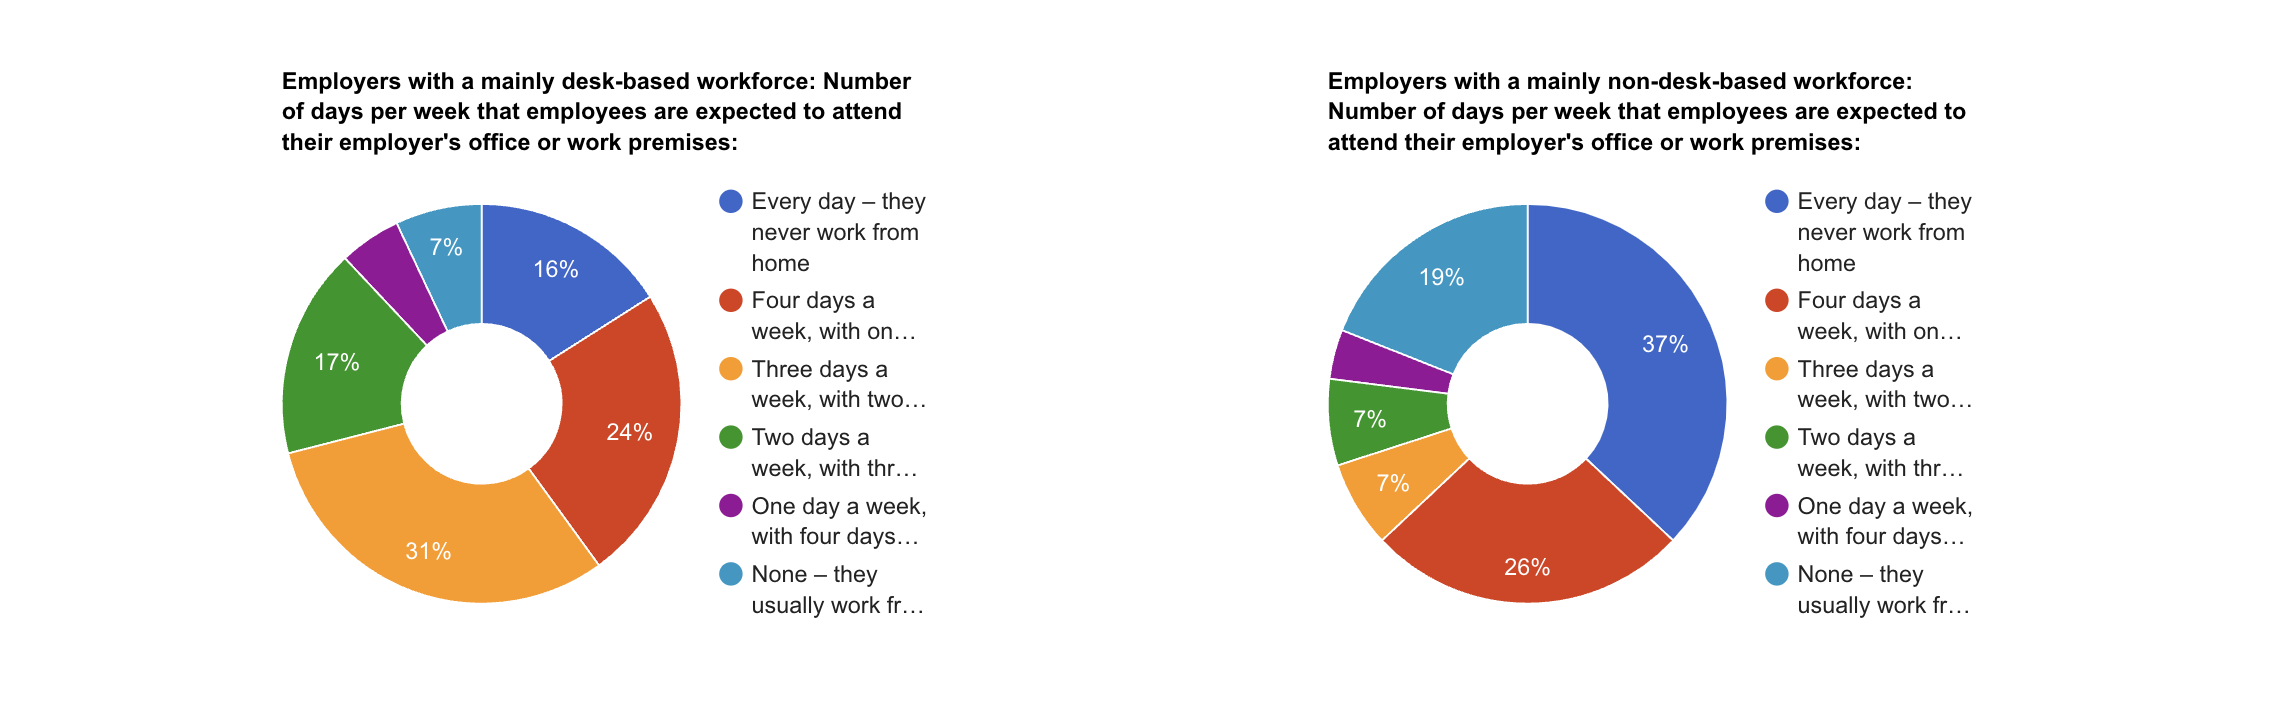 Number of days per week that employees are expected to attend their workplace